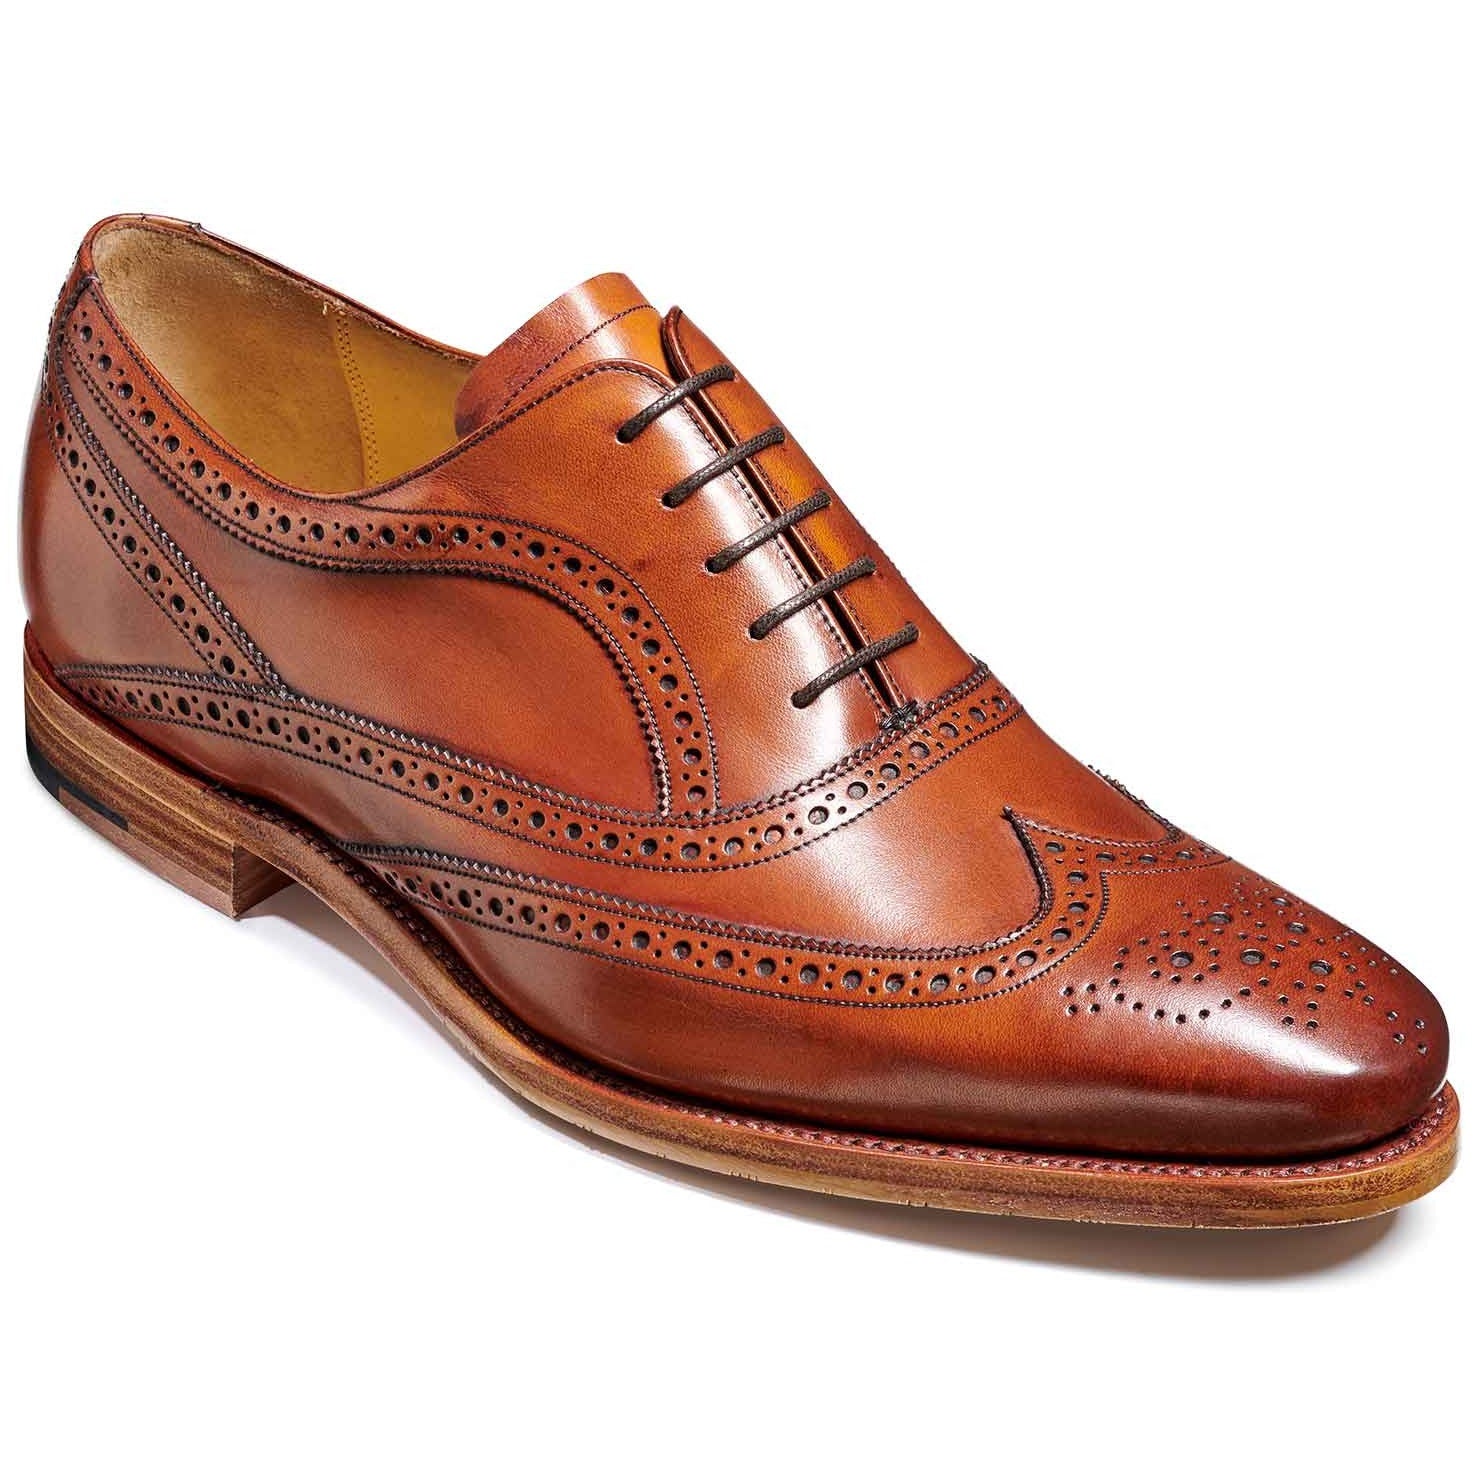 BARKER Turing Shoes – Mens Oxford Brogue Shoes – Antique Rosewood Calf